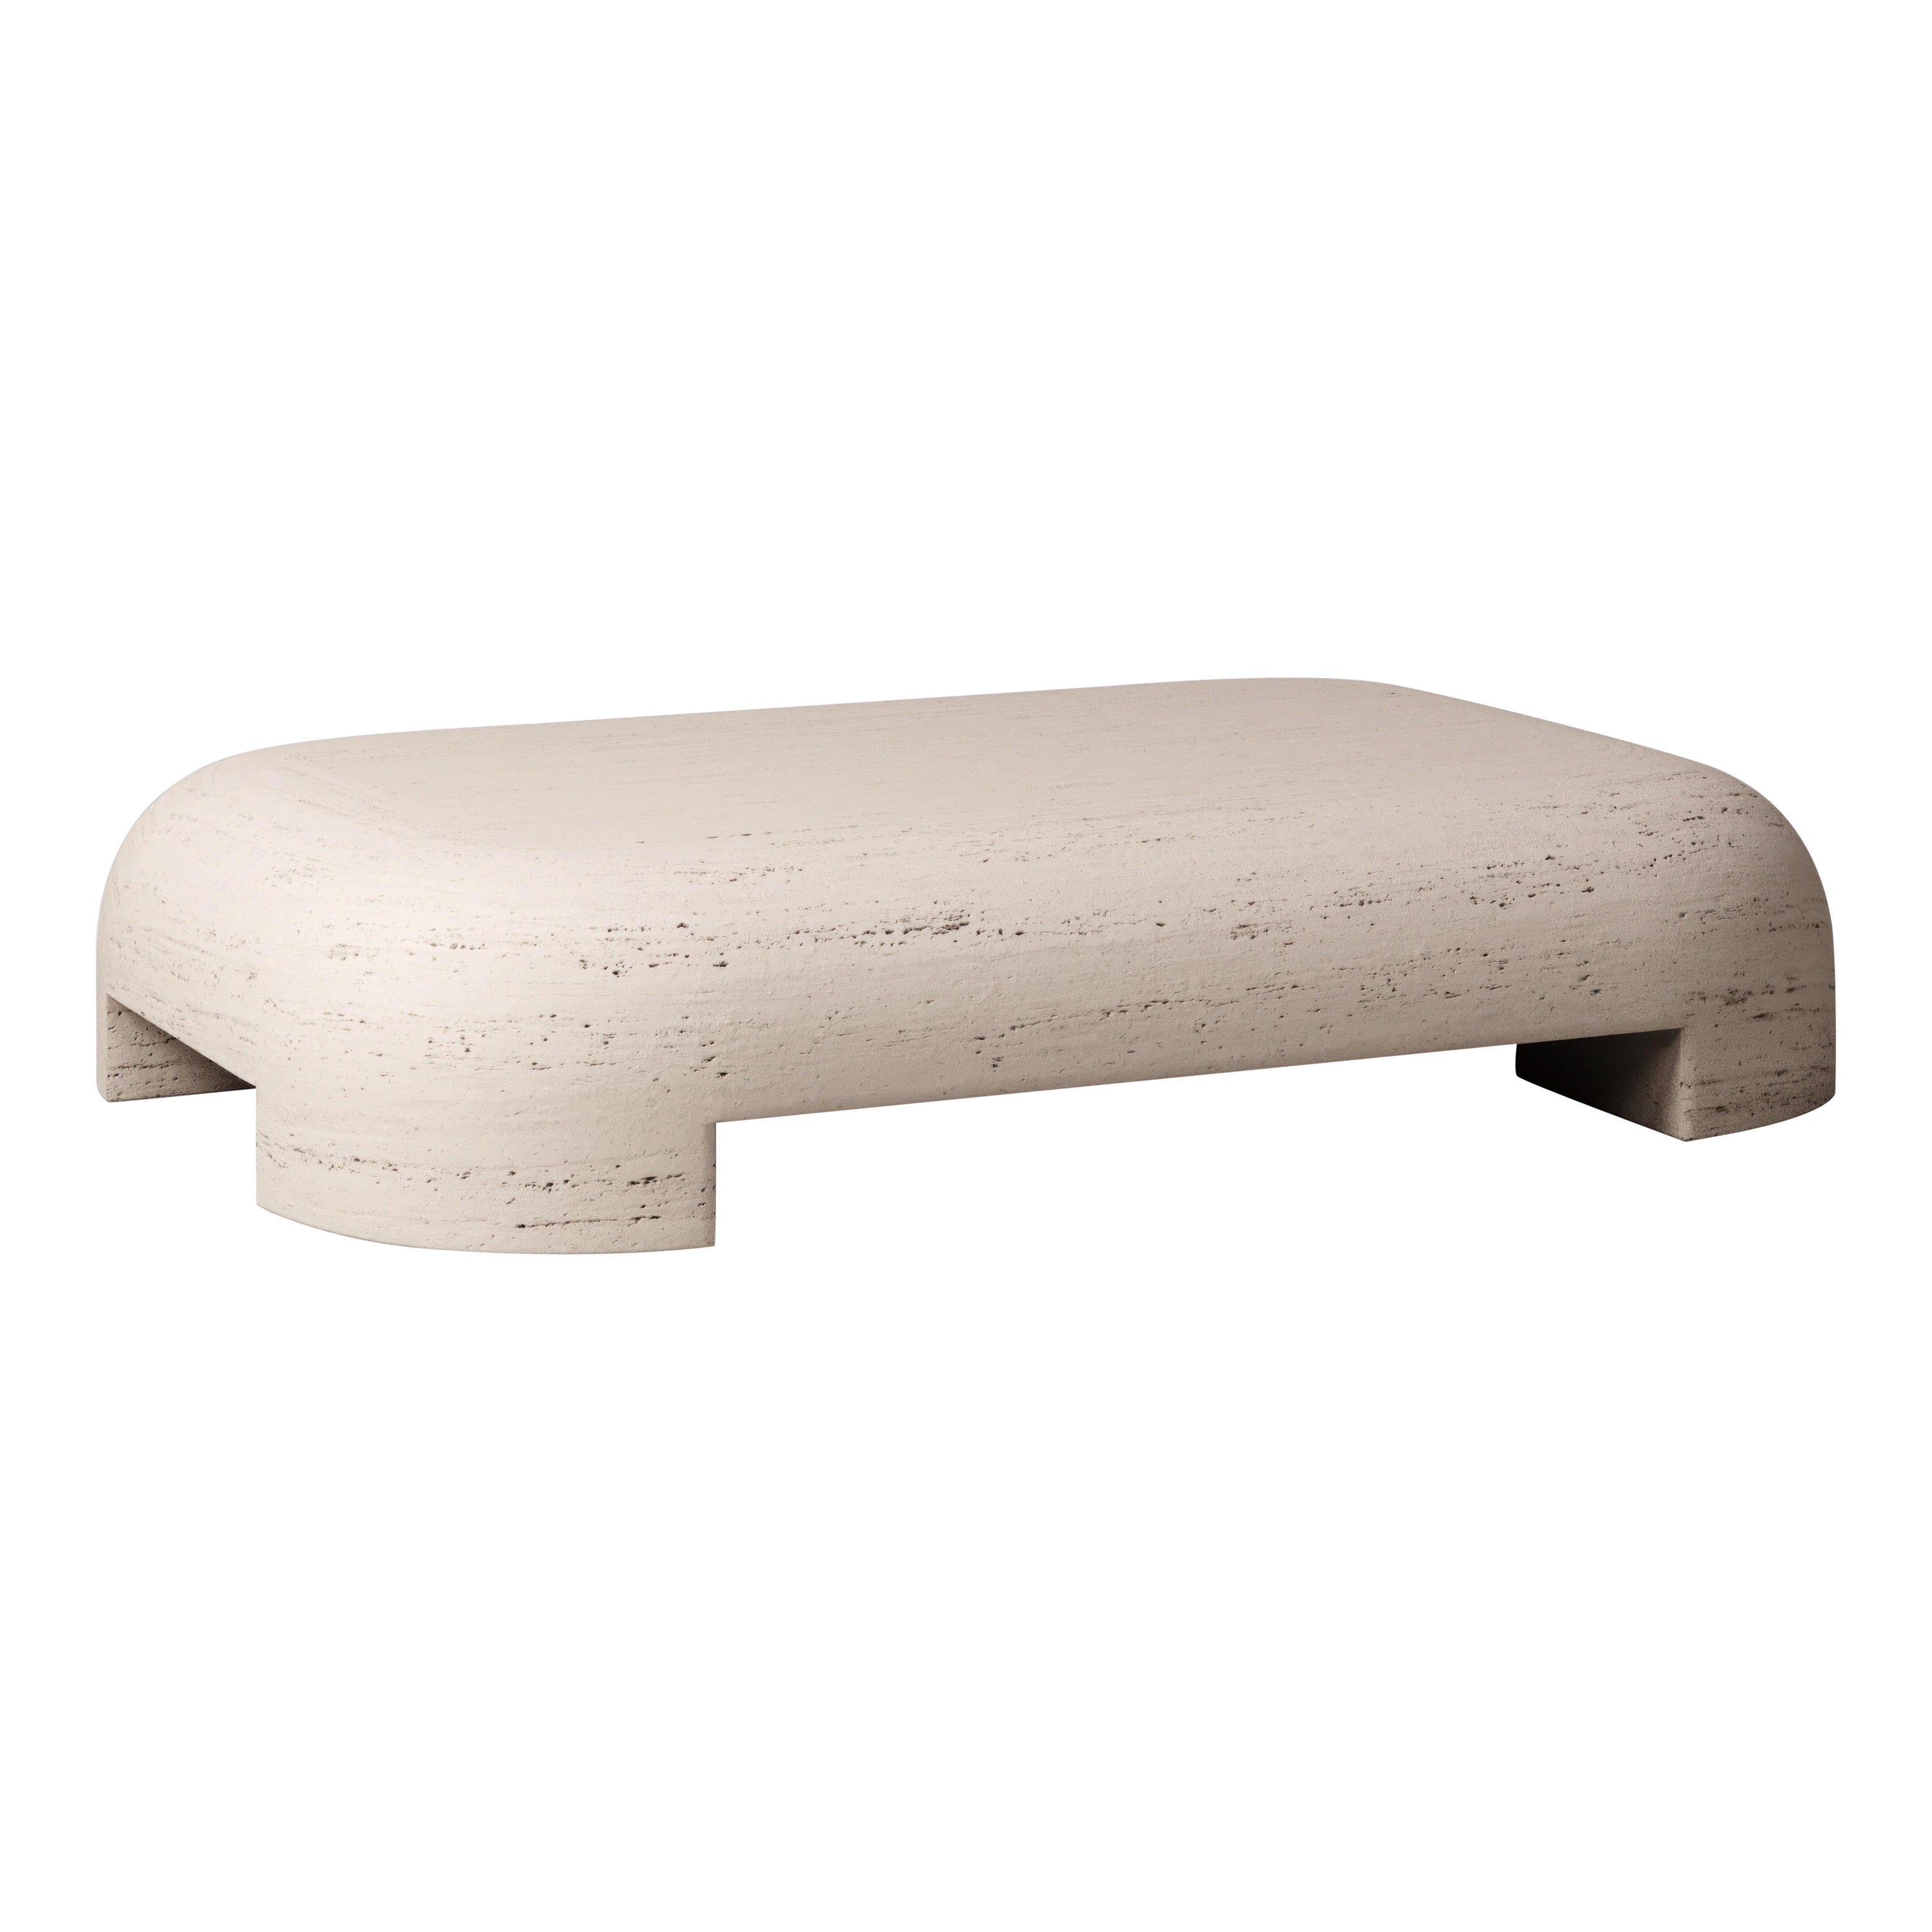 M_012 Coffee Table / Travertine by Monolith